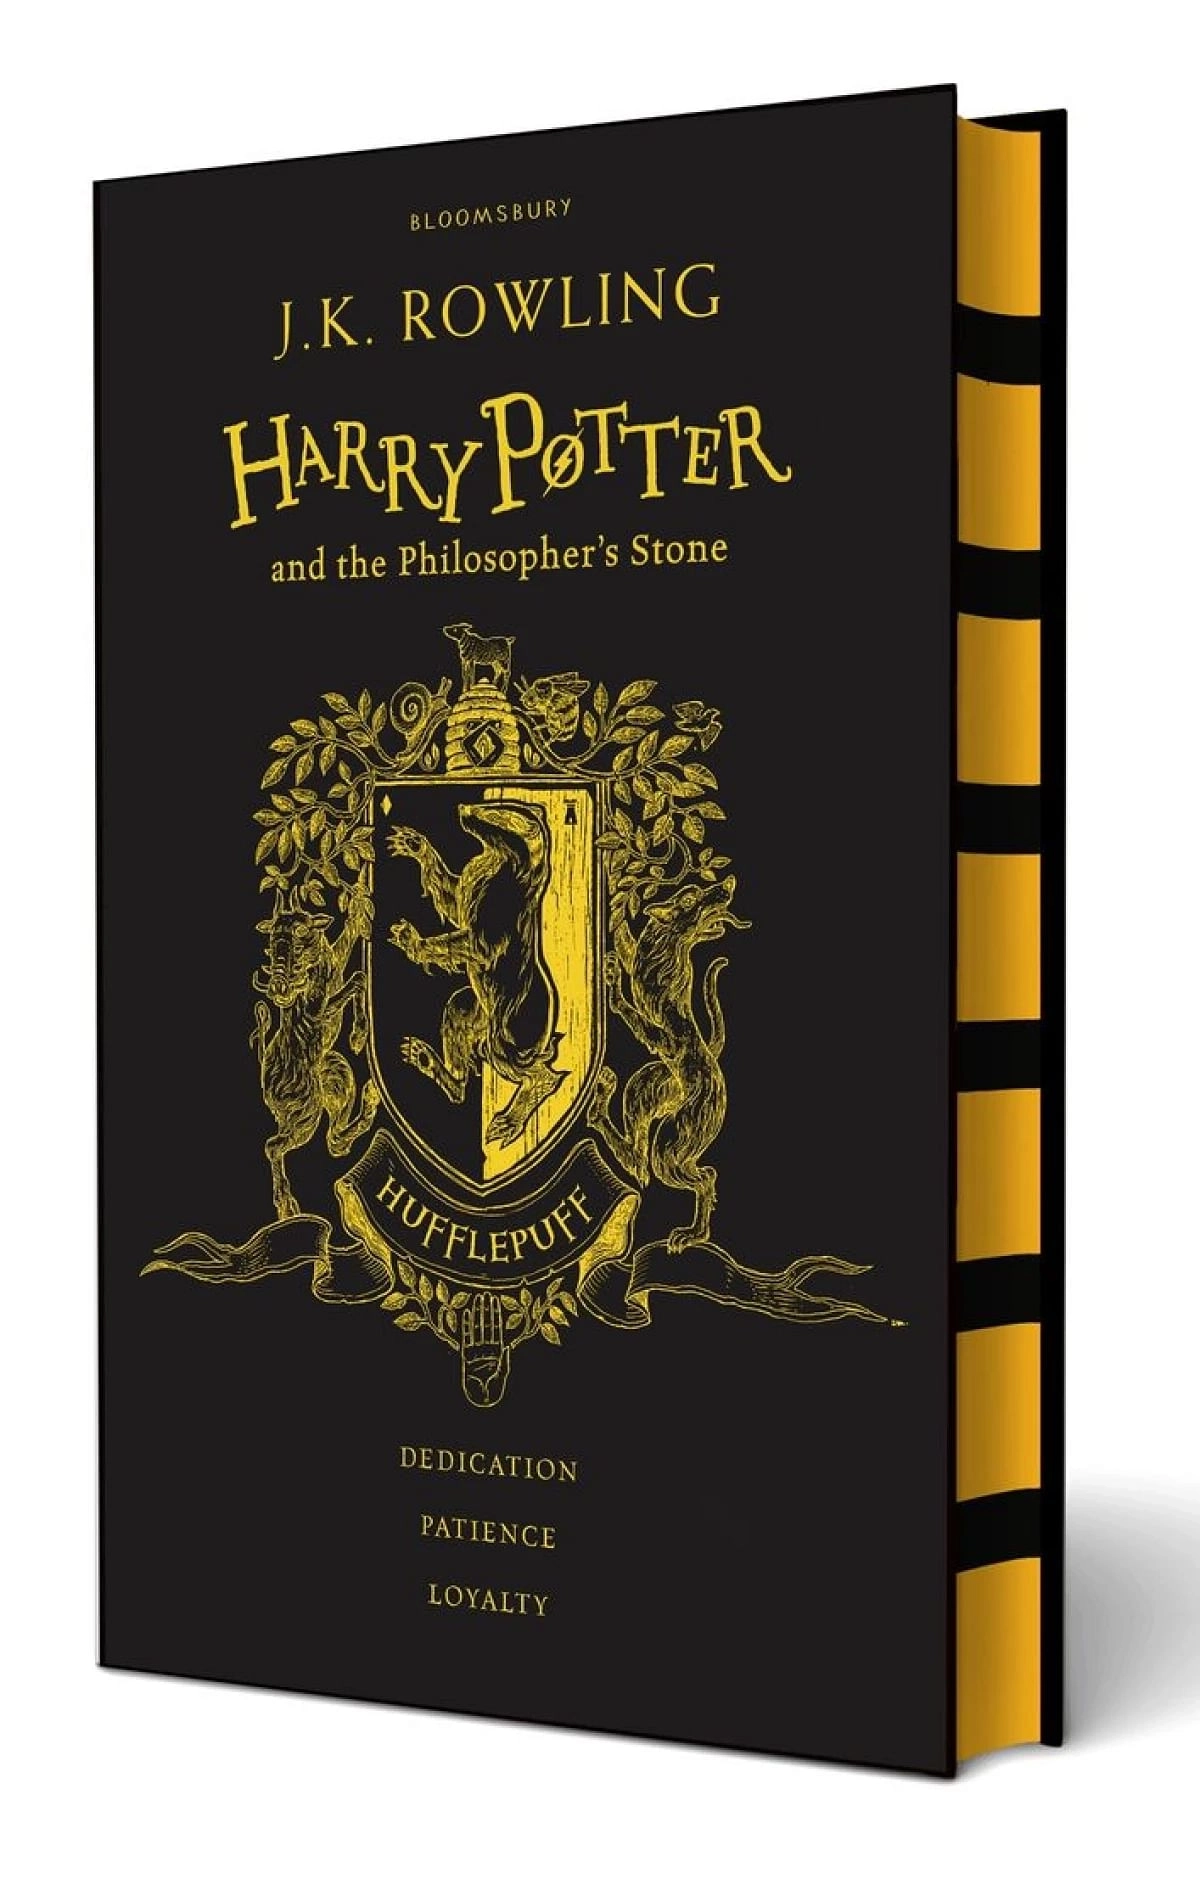 Harry Potter and the Philosopher's Stone  Hufflepuff Edition, Collectible Books For Potterheads, Story Books For Kids